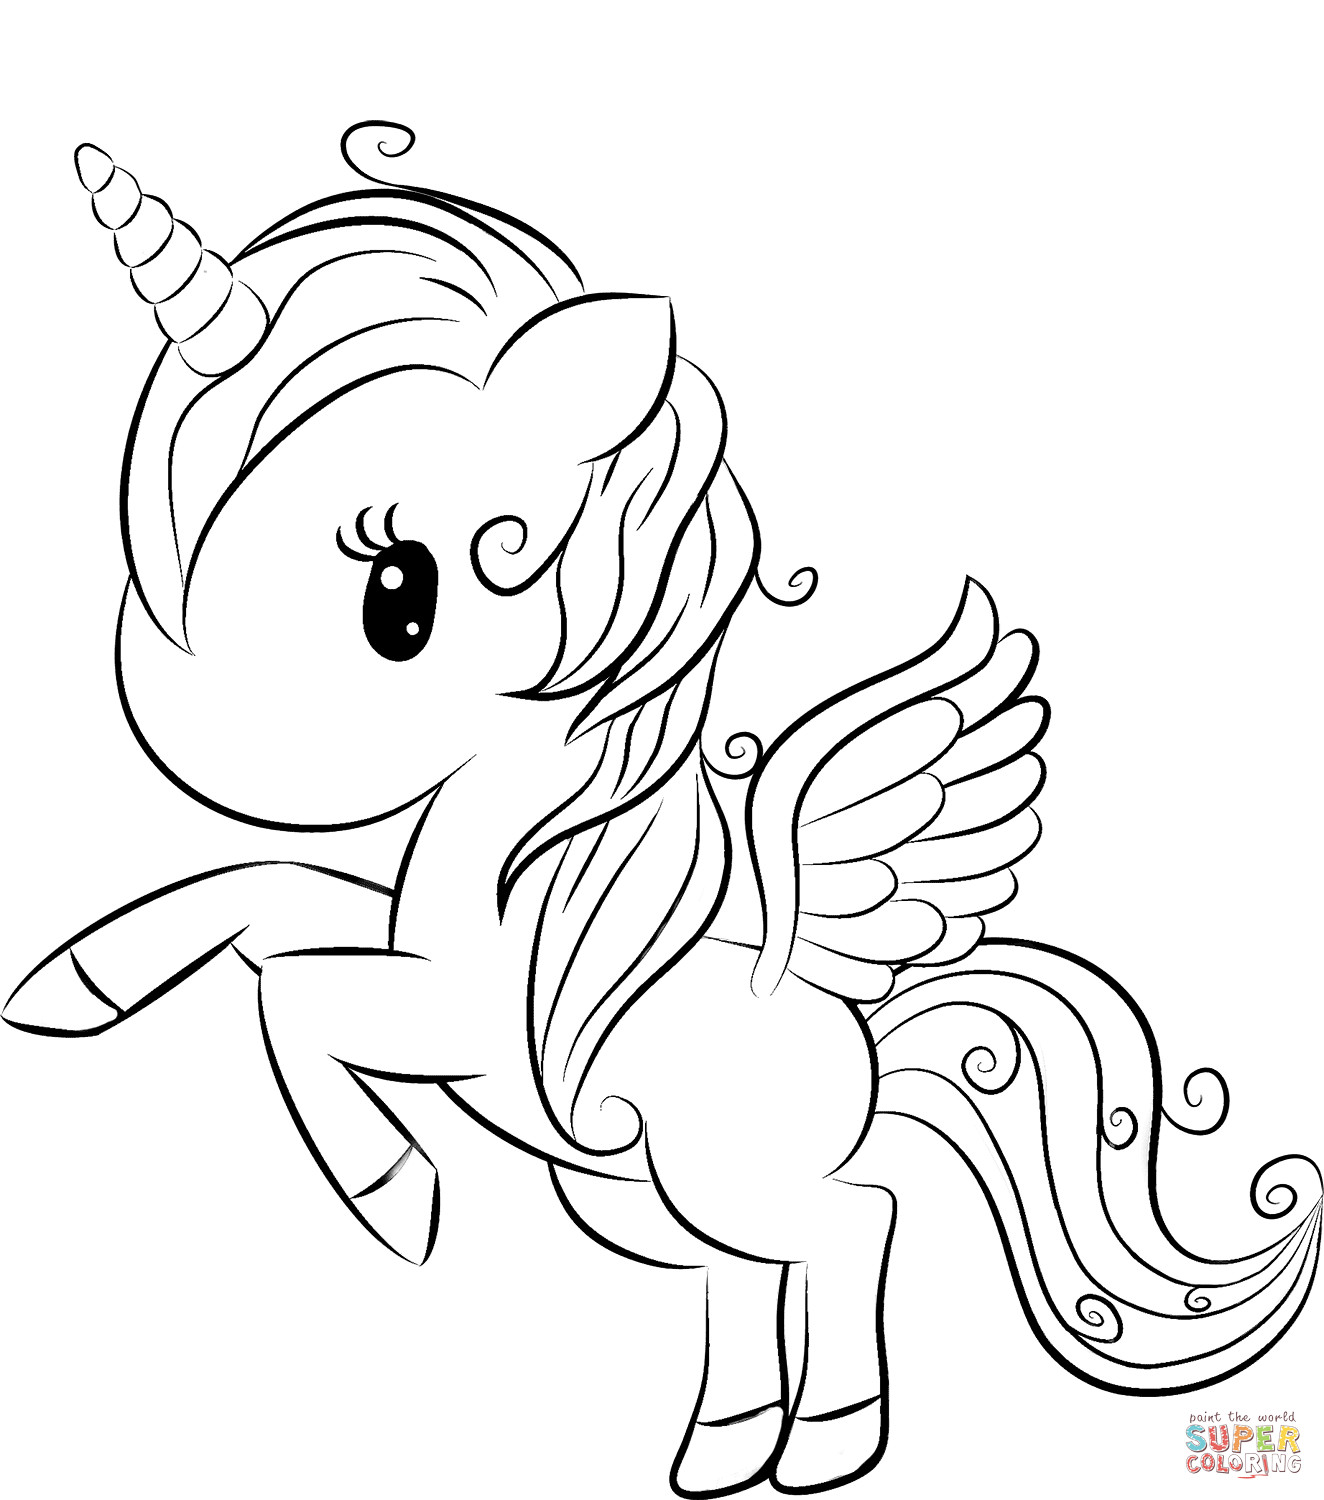 Cute Unicorn Coloring Pages For Kids
 Cute Unicorn coloring page